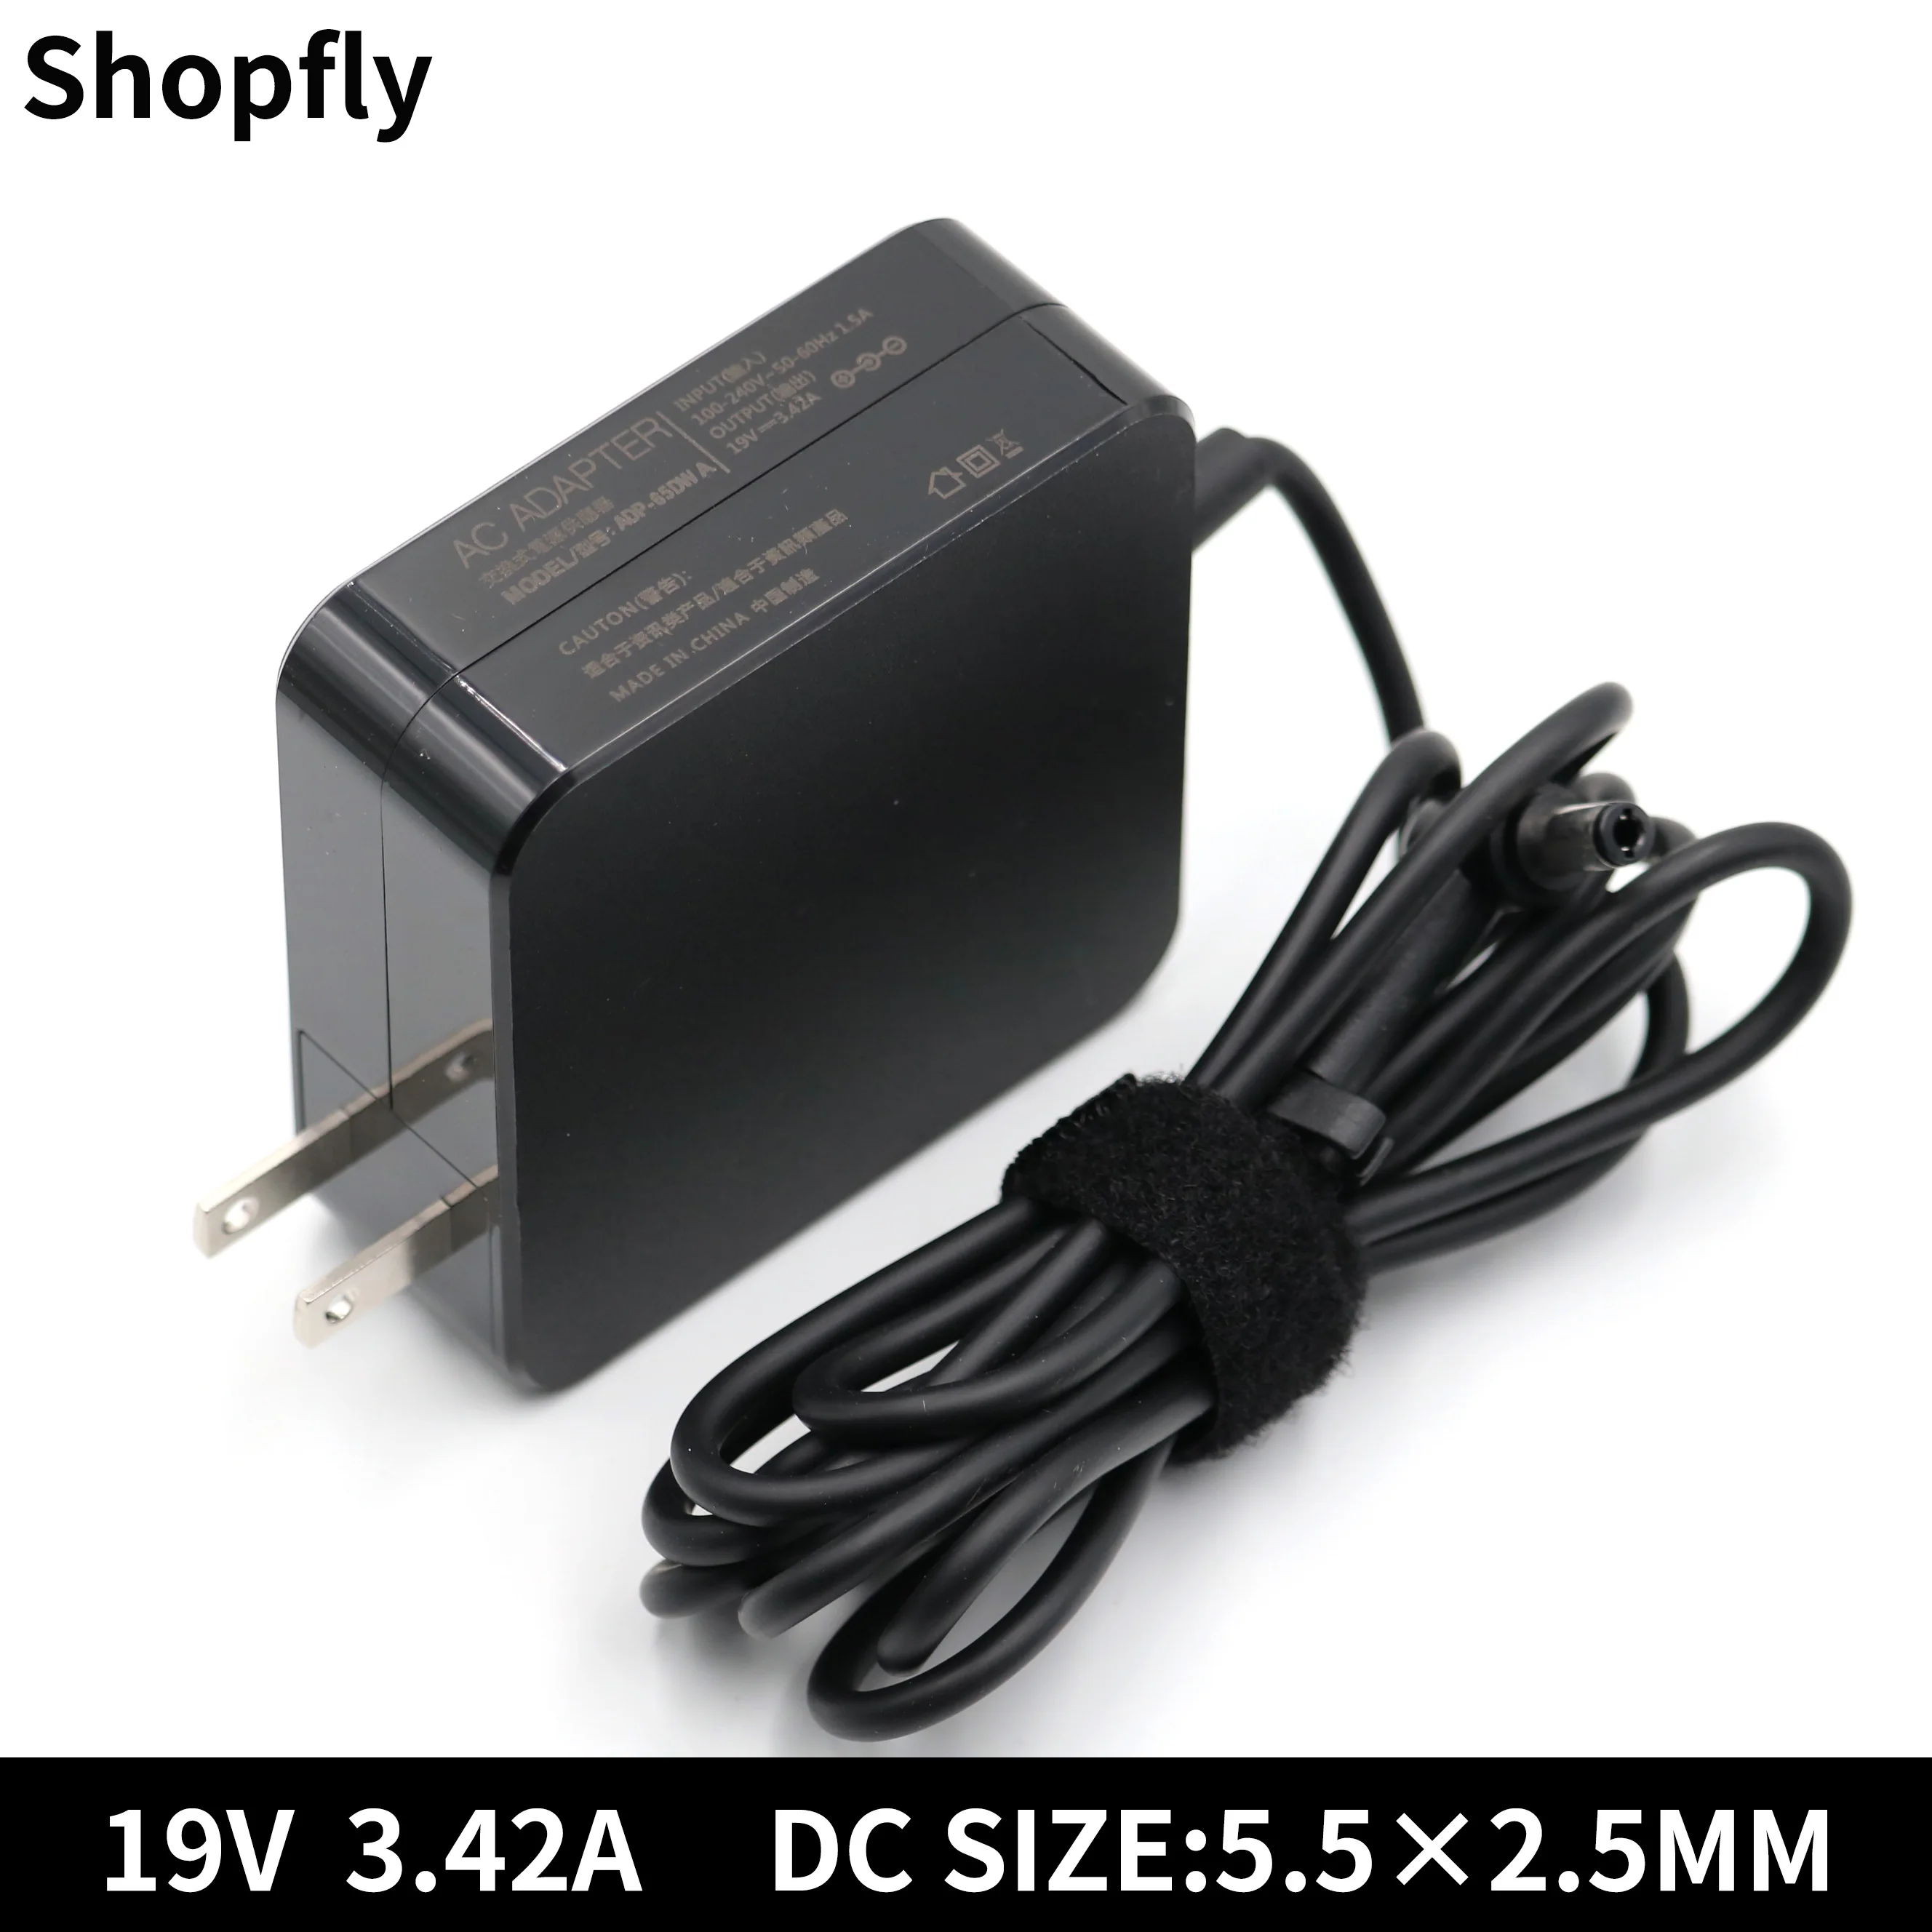 

Asus ADP-65GD B 19V 3.42A 65W 5.5x2.5mm AC Adapter Power Charger For Asus A42F A46CA K62F K52F X55A X550CA U52F U56E Laptop